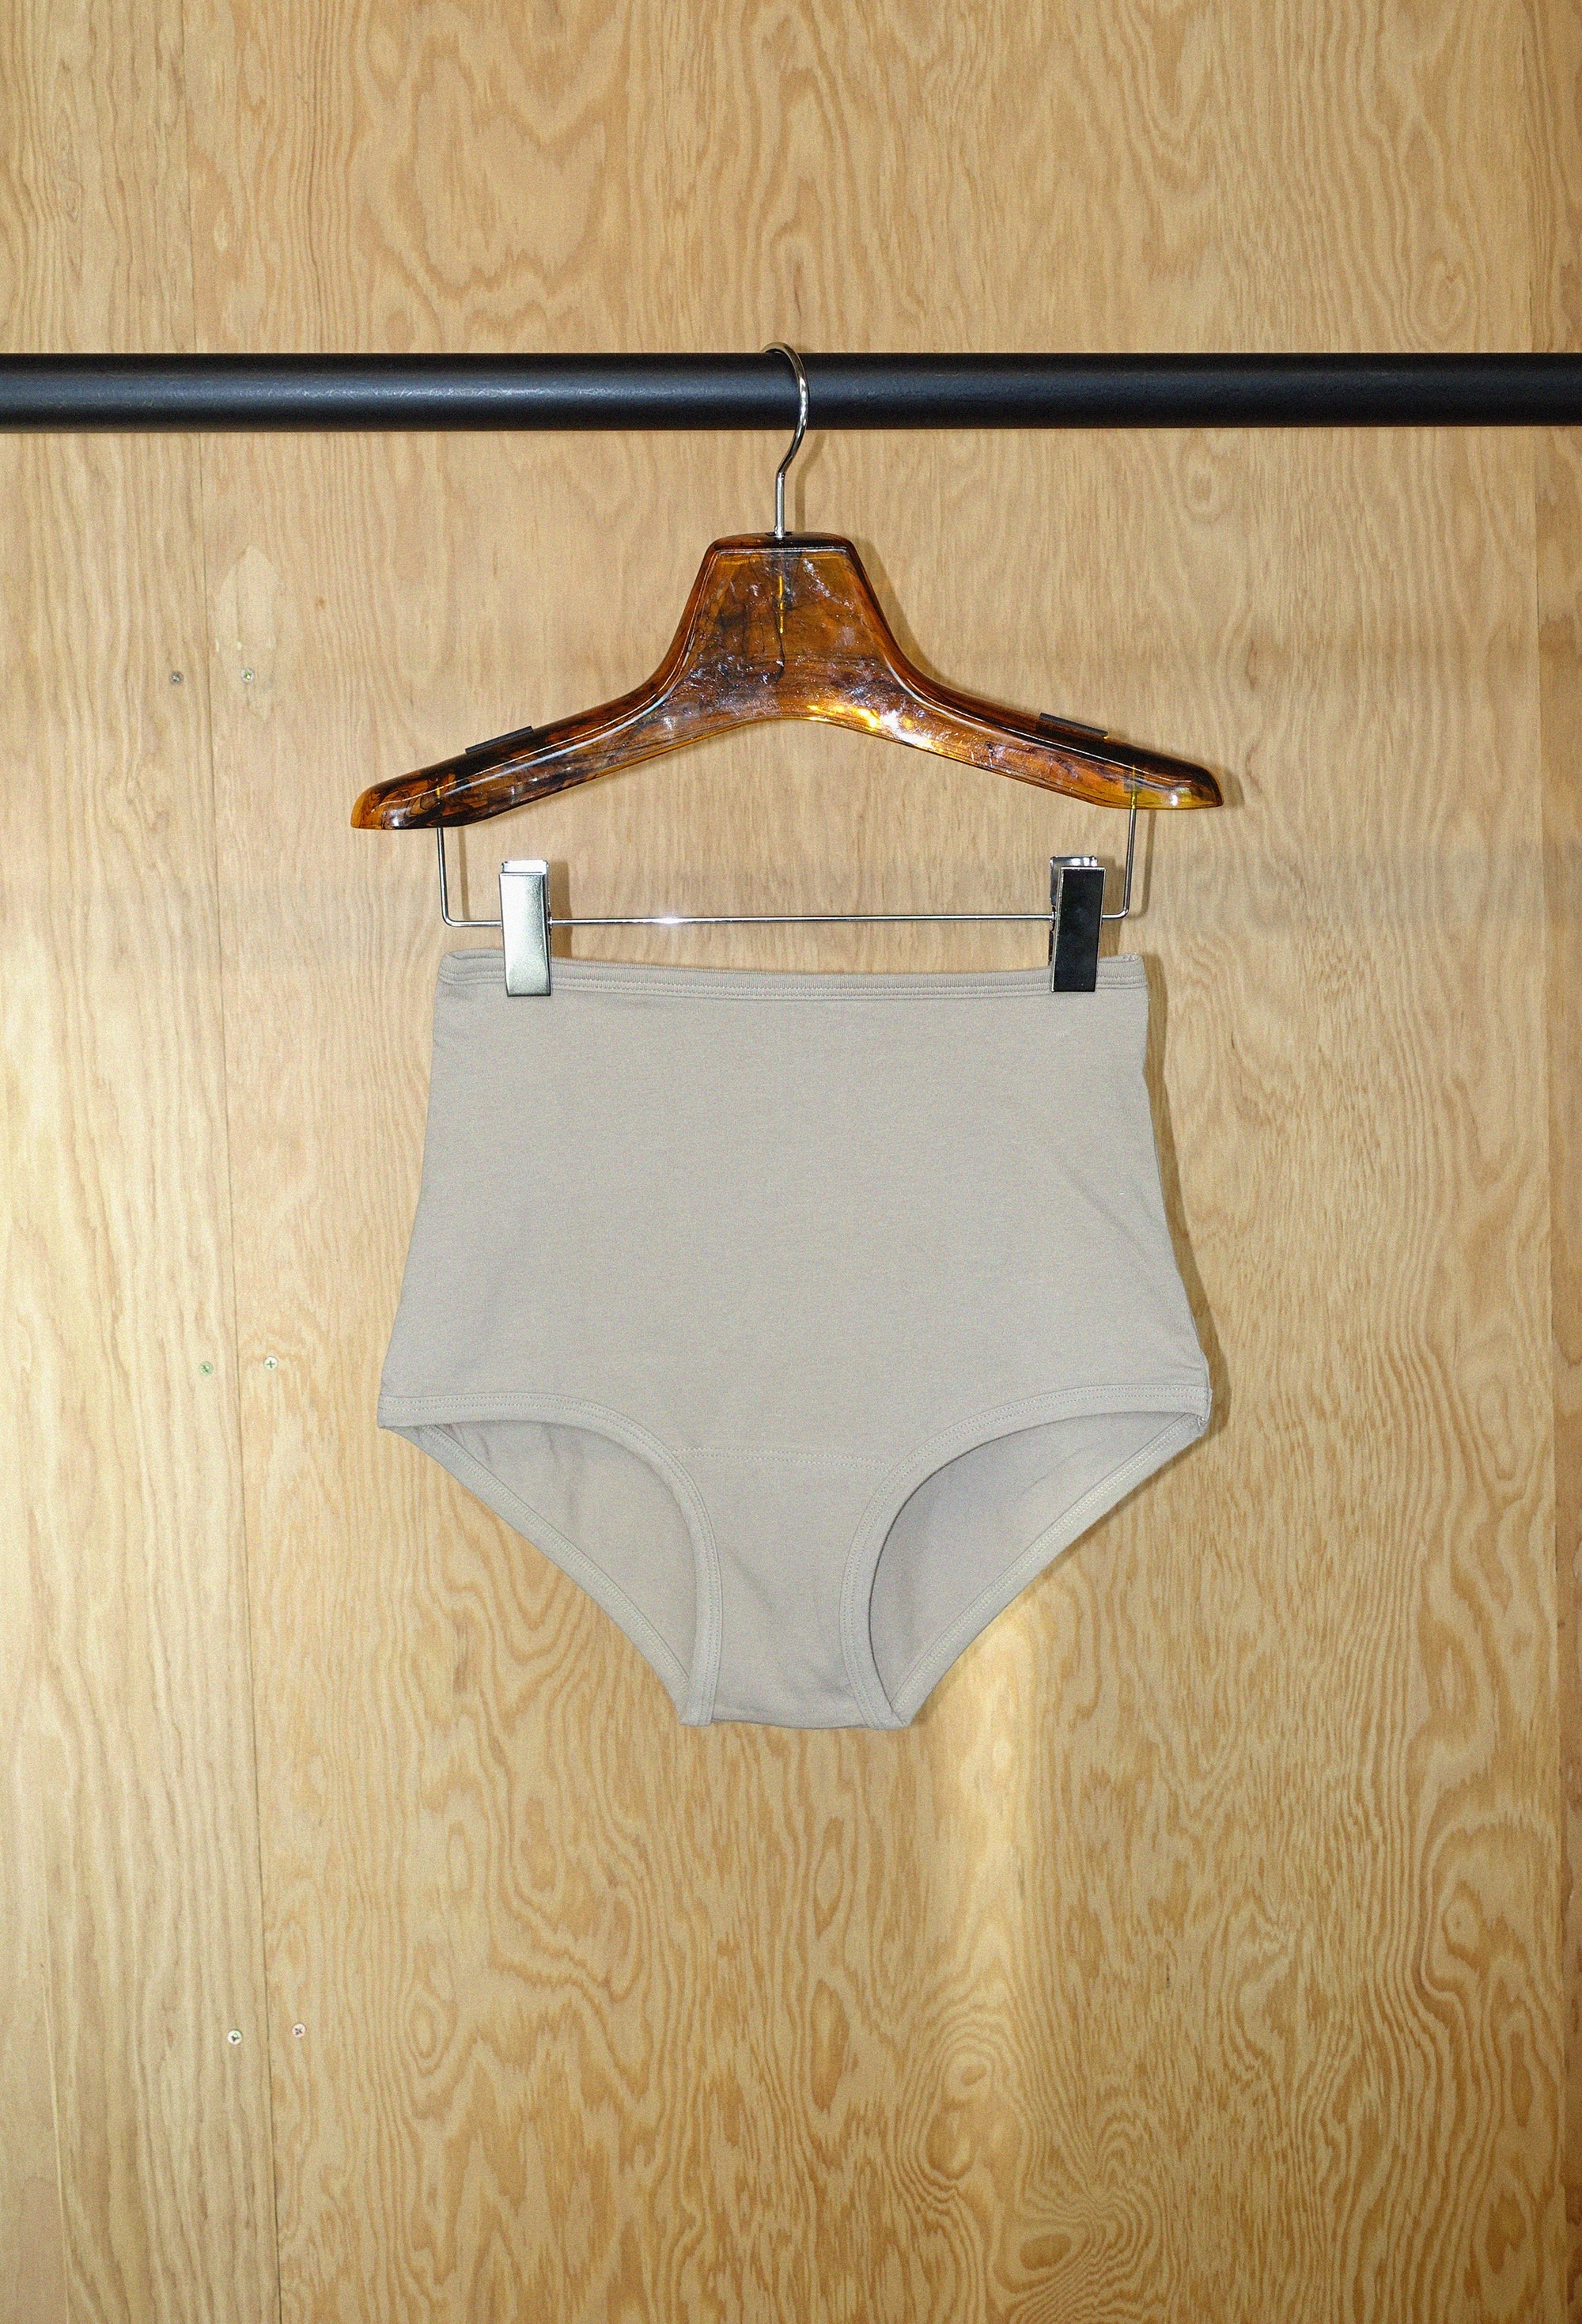 High-Rise Undies in Taupe by Arq